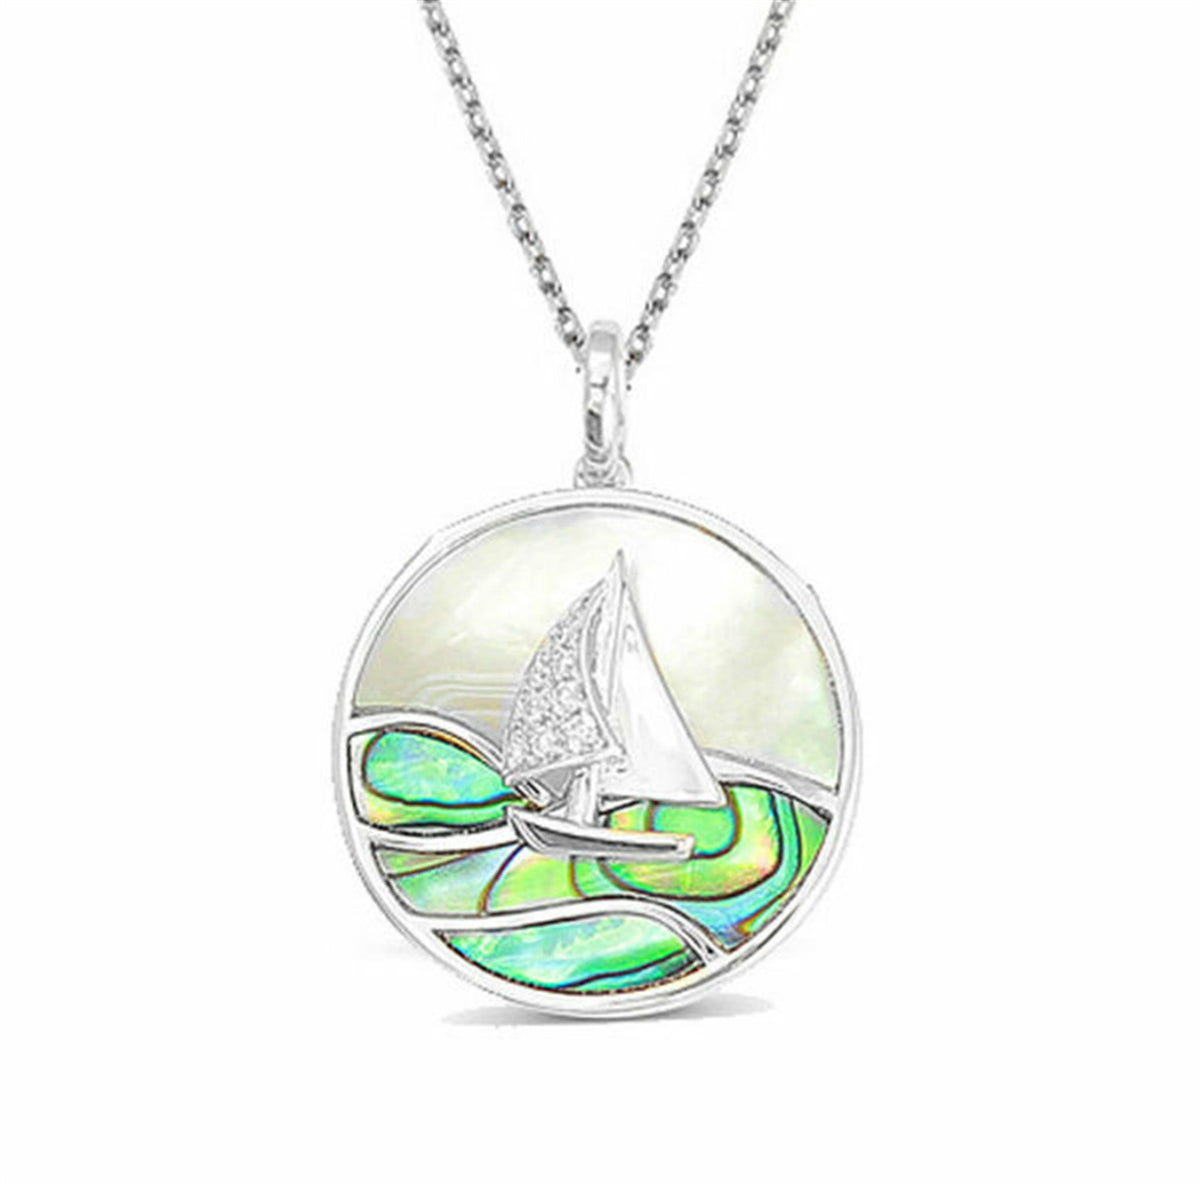 Freerdick Sage 14Kt White Gold Abalone Inlay Pendant with 0.03cttw Natural Diamonds